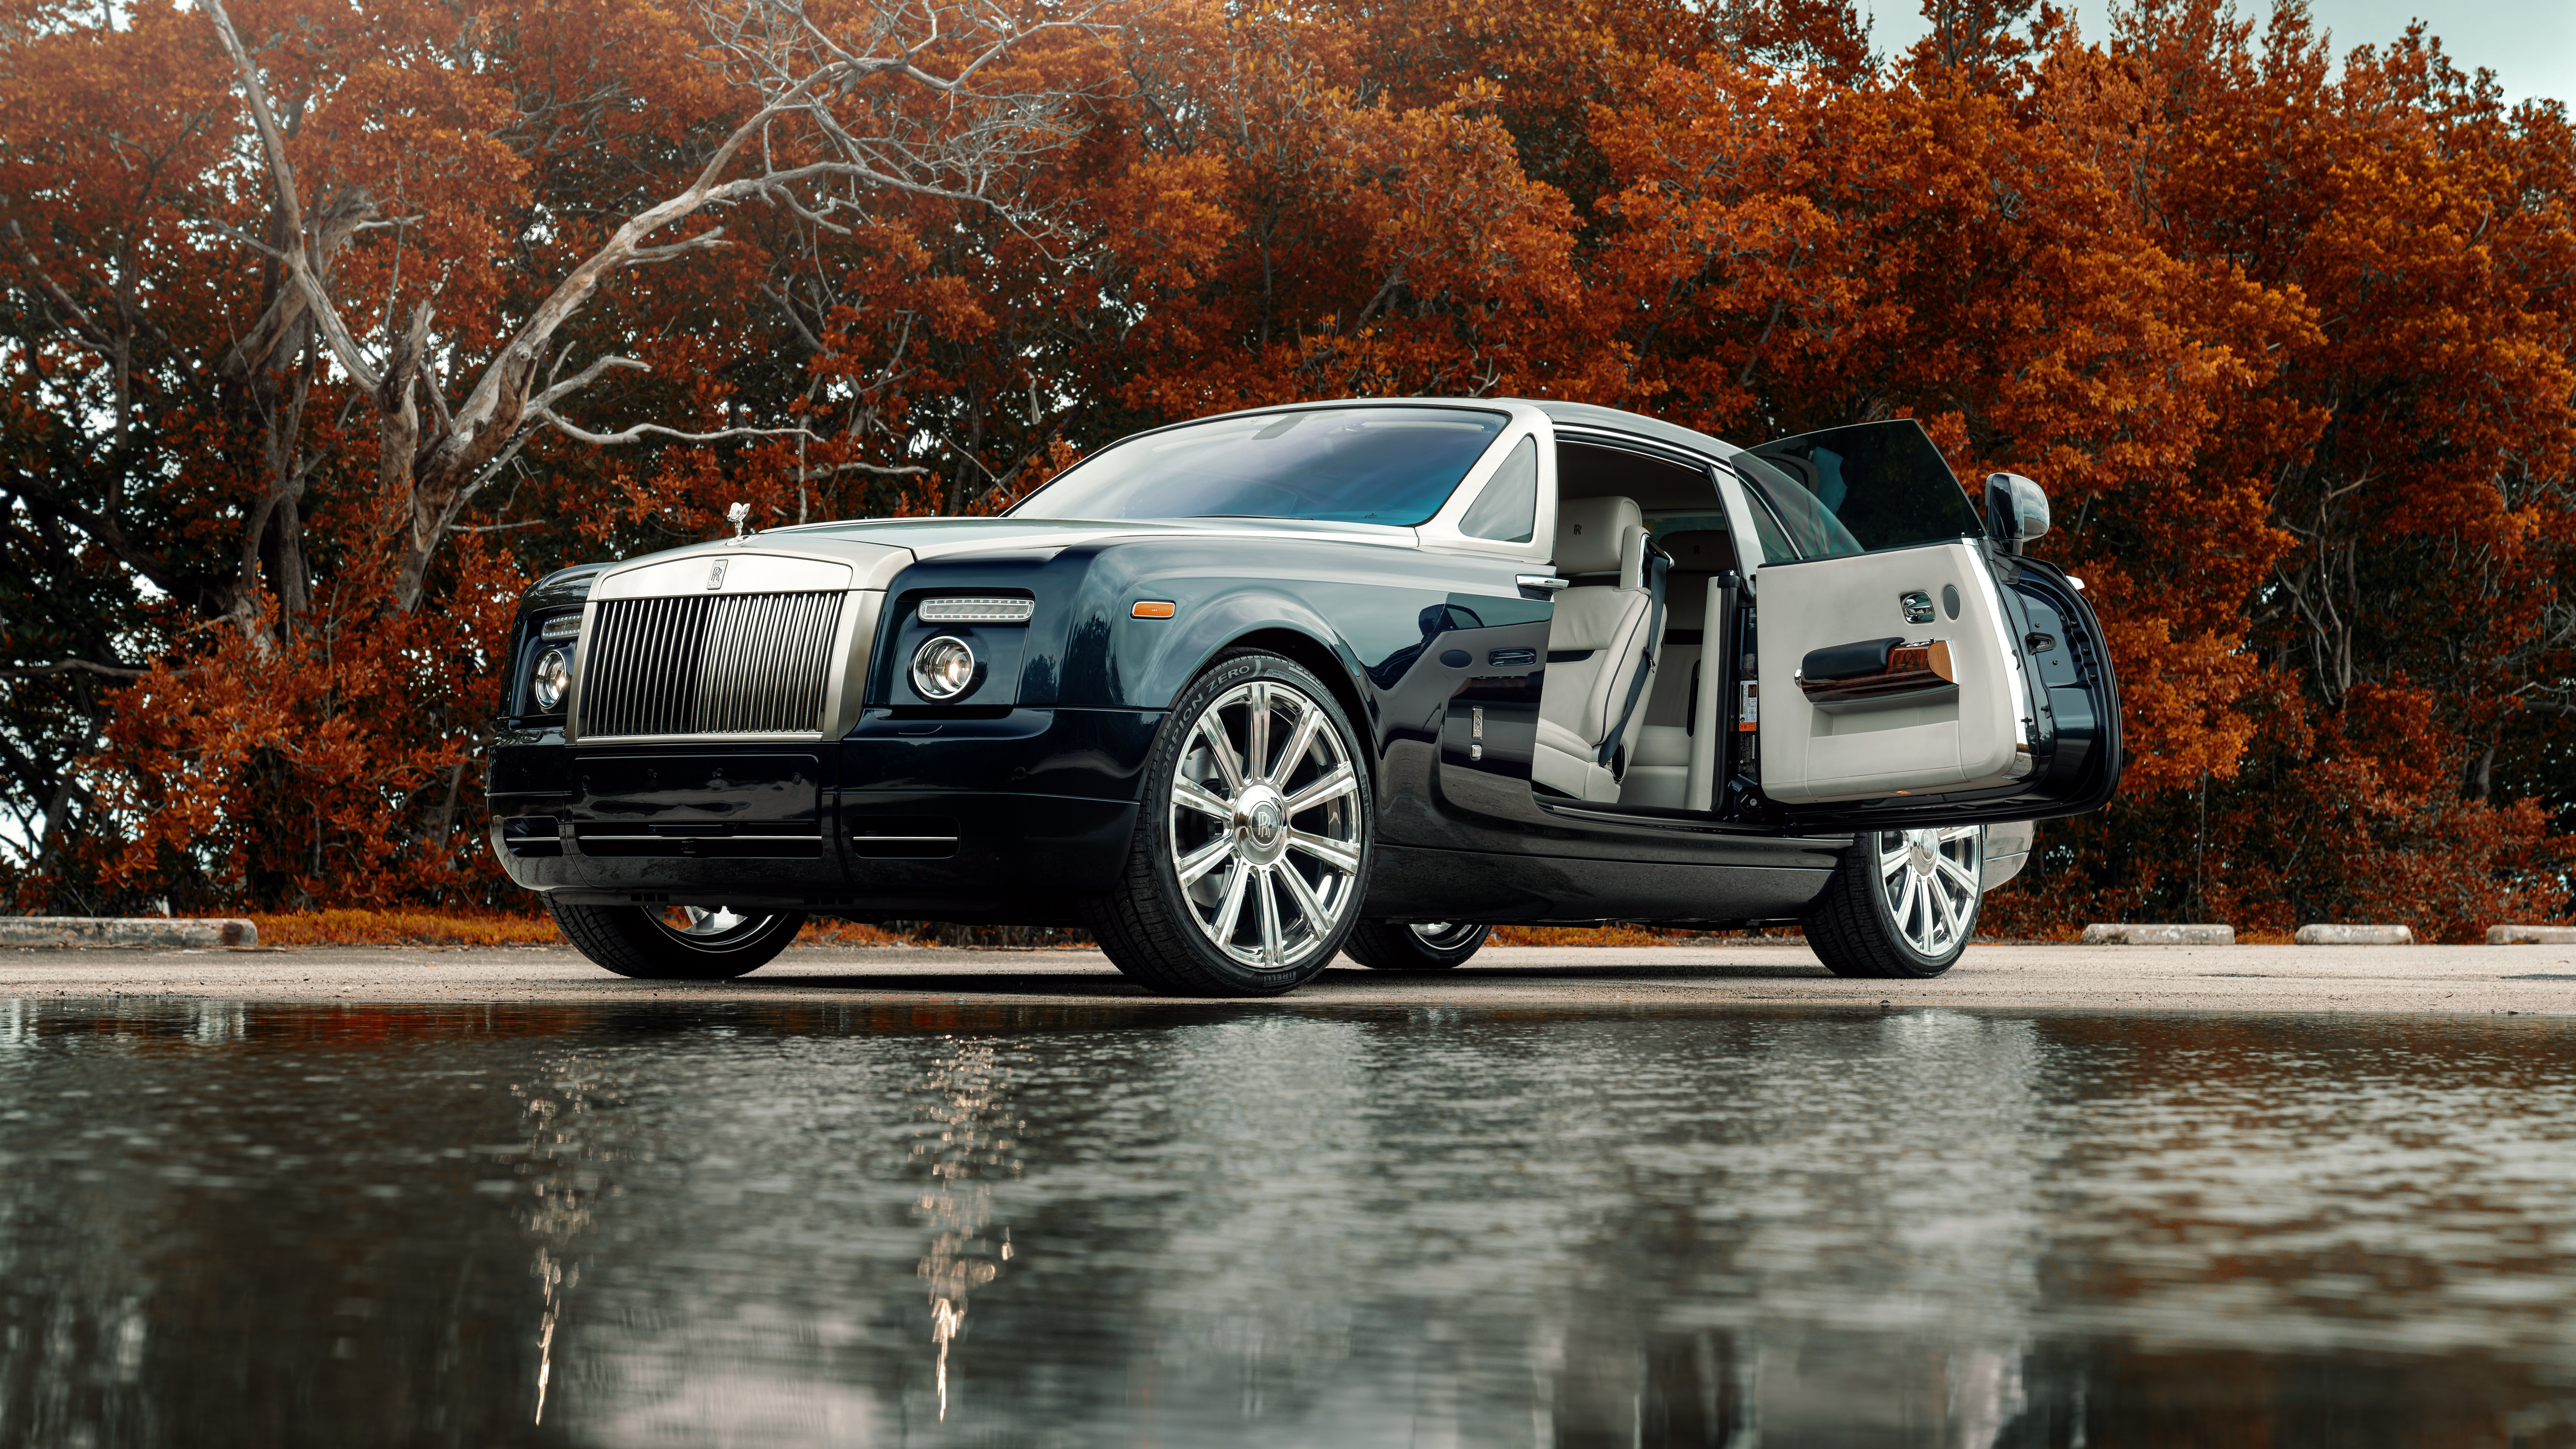 General 5120x2880 car Rolls-Royce luxury cars British cars frontal view vehicle trees water reflection